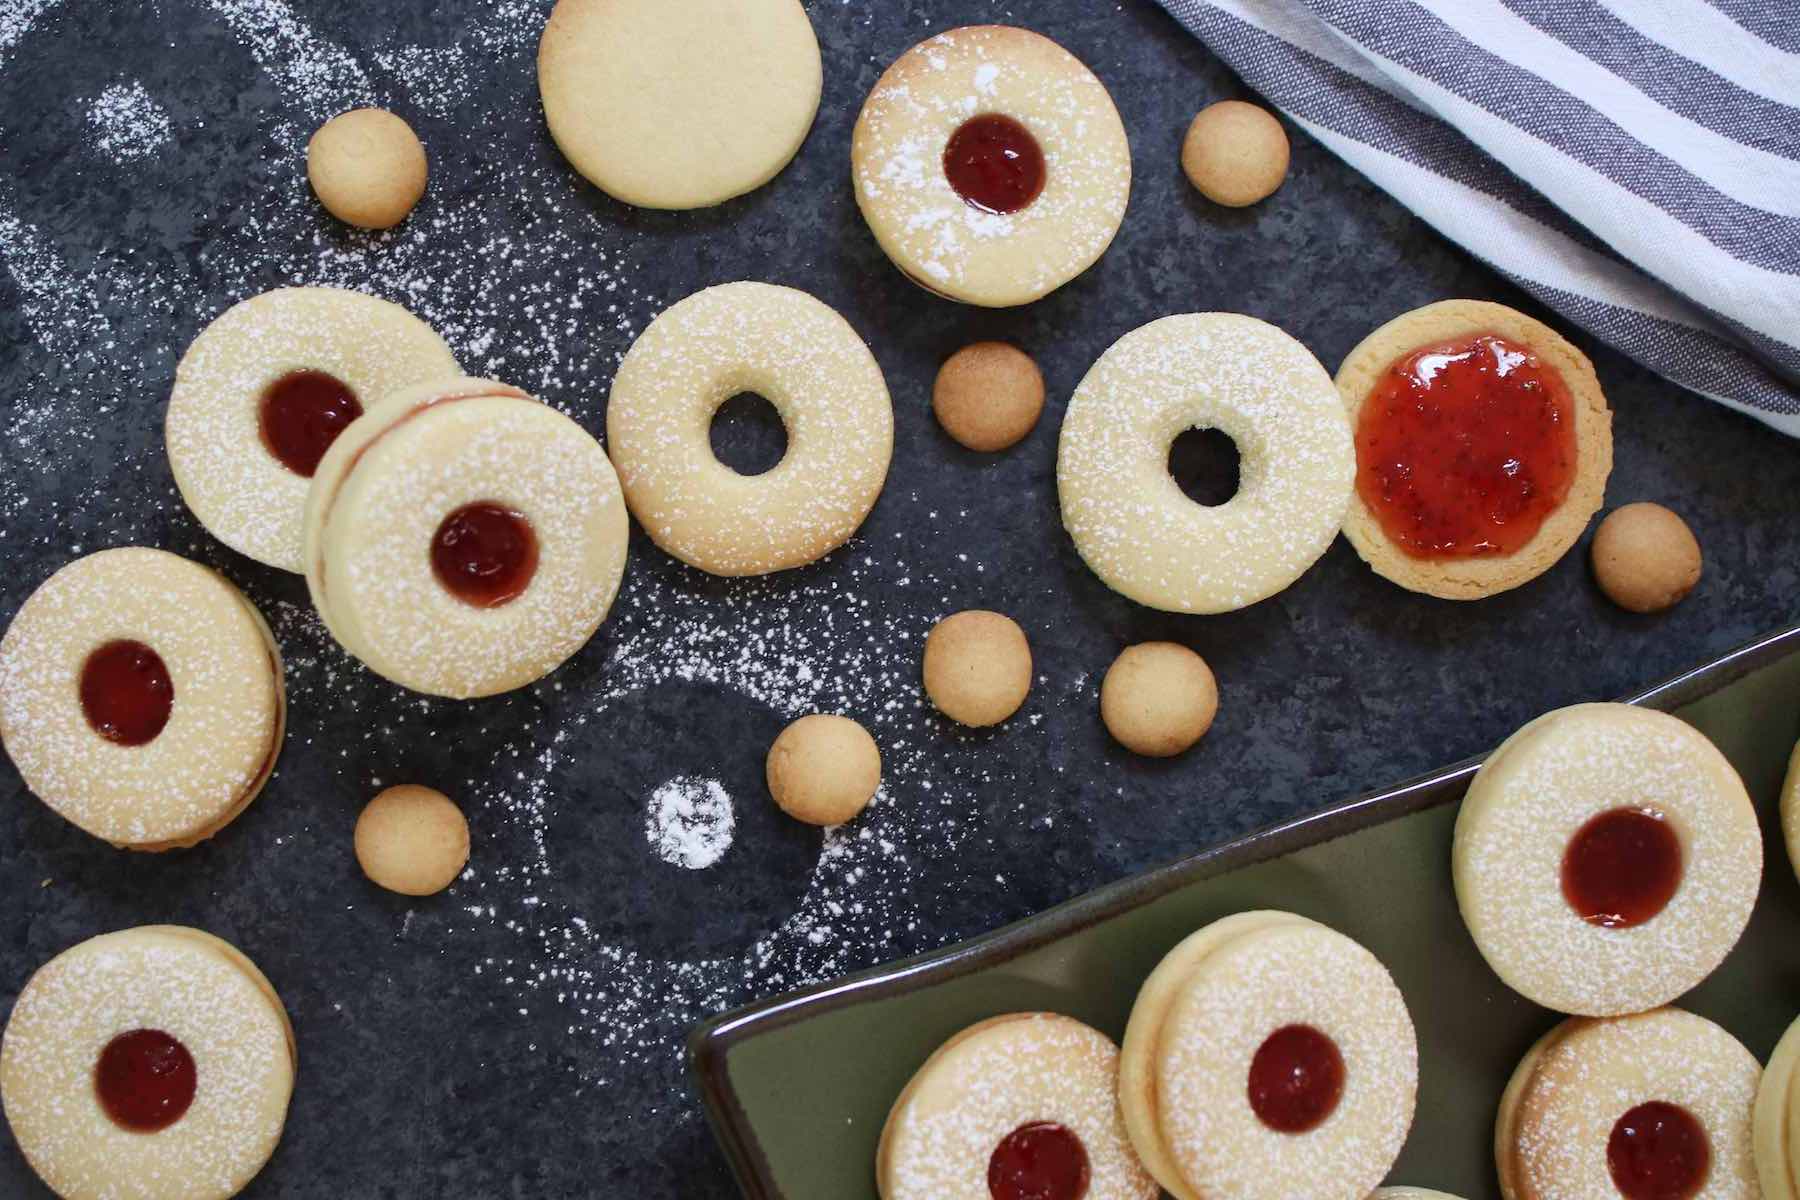 Assembling Jammie Dodgers after the top layers were dusted with icing sugar.